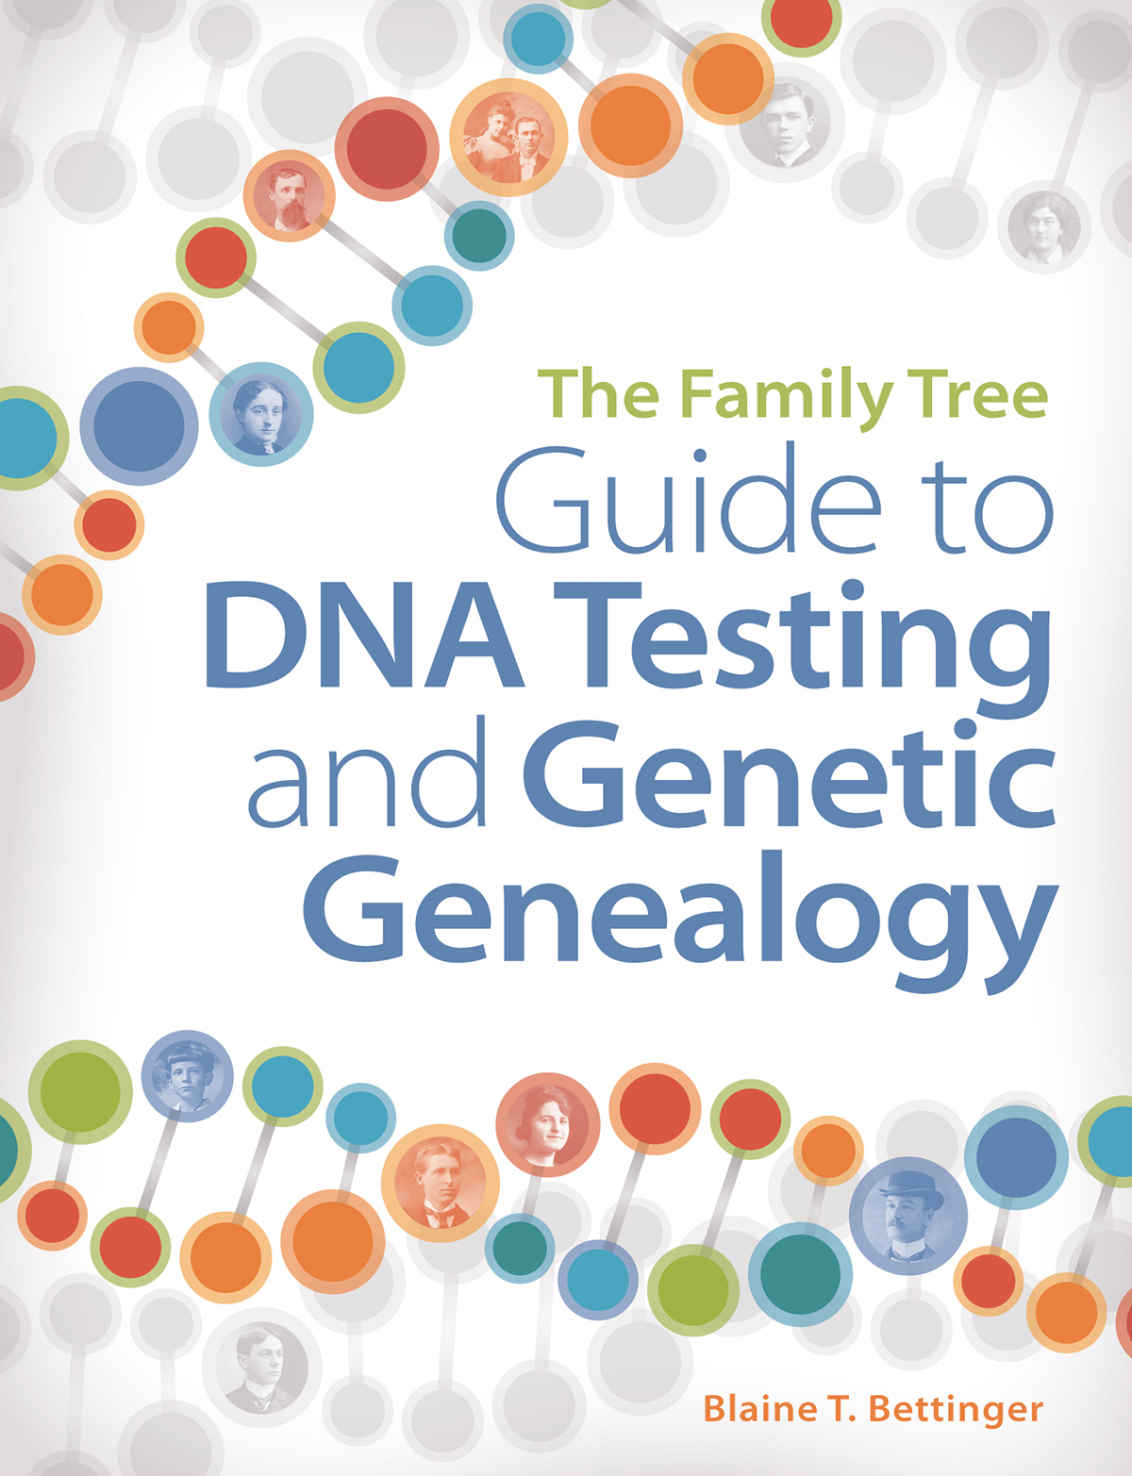 Review: The Family Tree Guide to DNA Testing and Genetic Genealogy